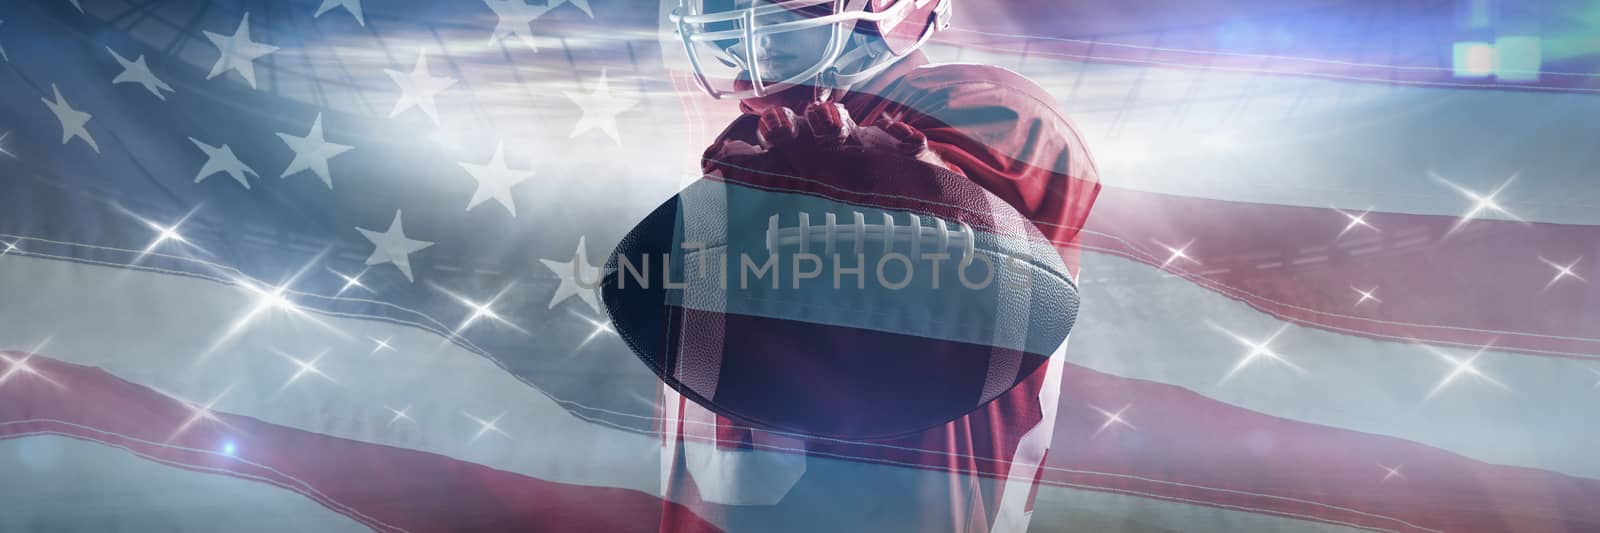 American football player standing in rugby helmet and holding rugby ball against close-up of an american flag